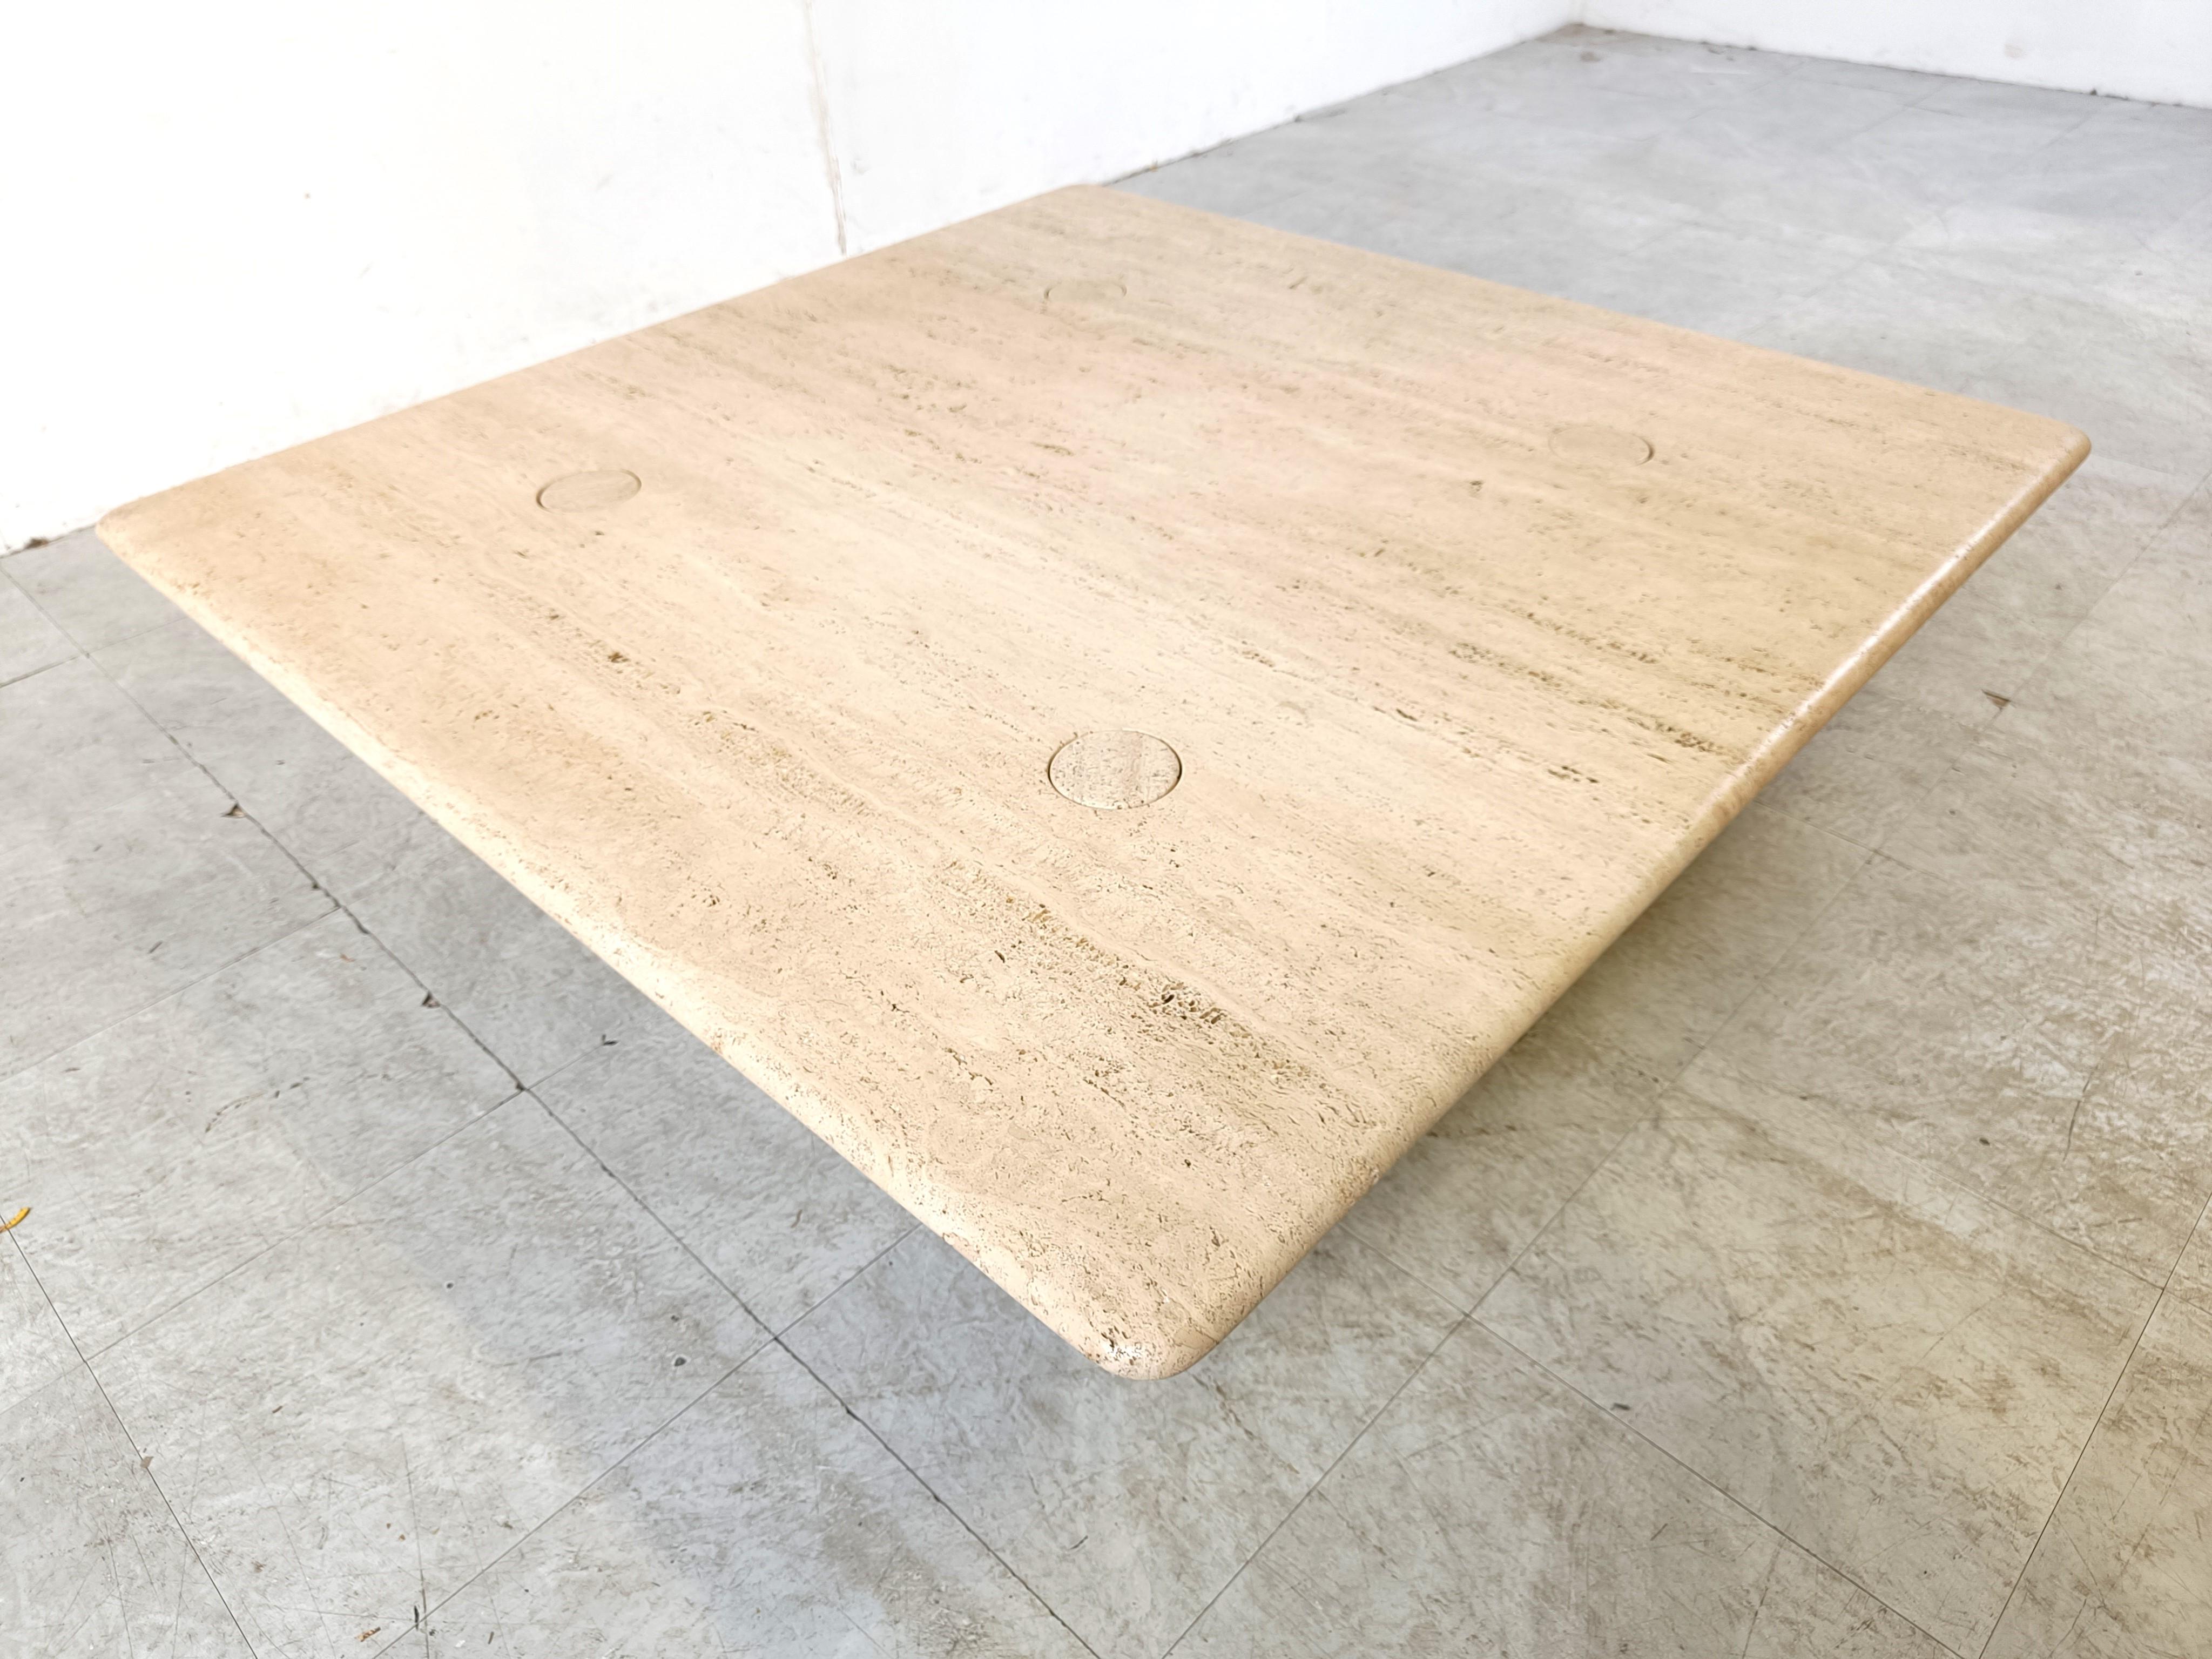 XL Angelo Mangiarotti Travertine Coffee Table for Up&Up, Italy For Sale 2